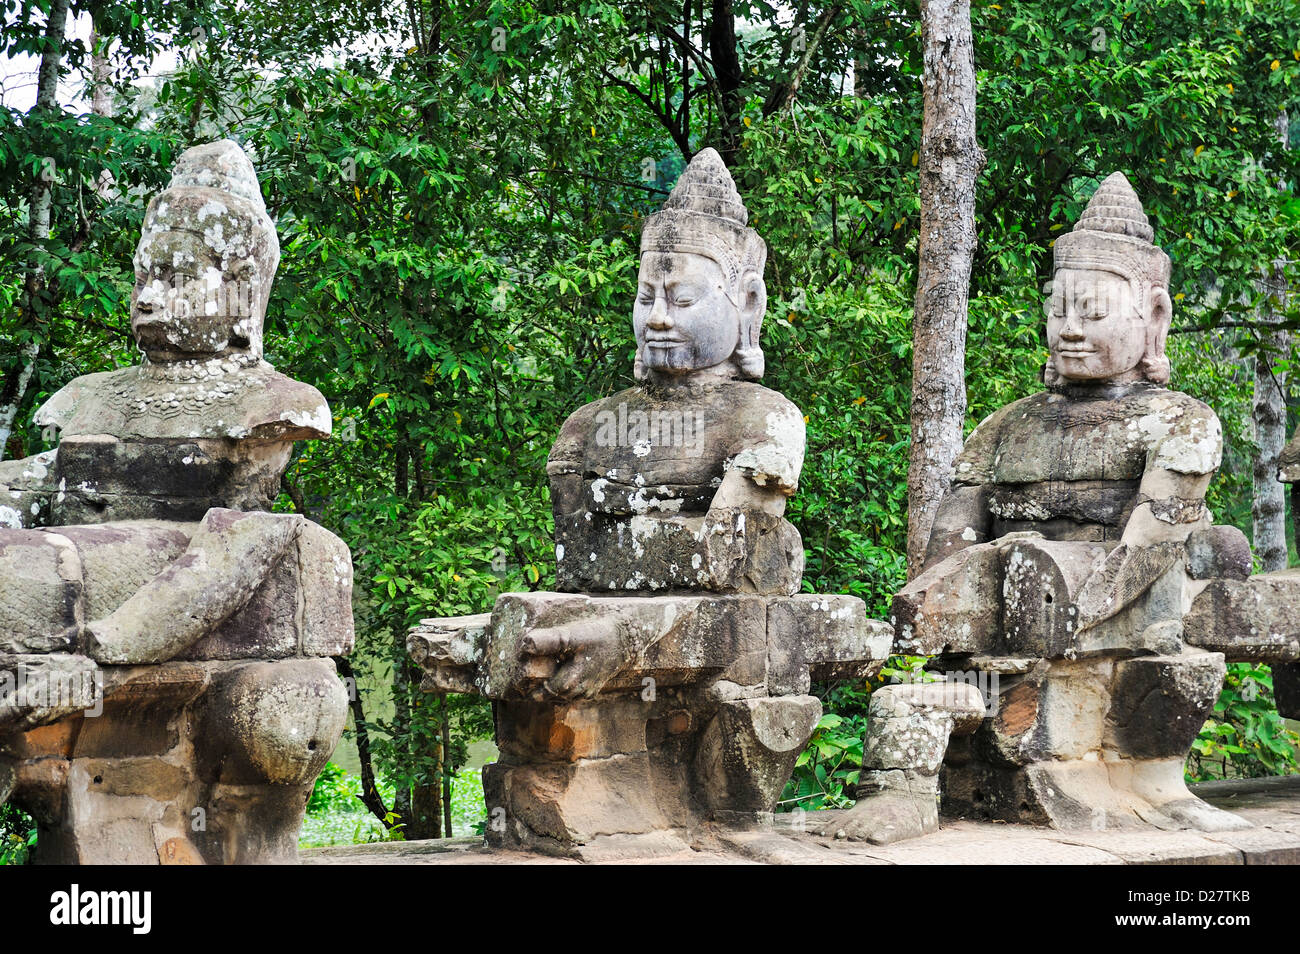 Carved stone statues aligned at South Gate to Angkor Thom, Angkor Wat, Siem Reap, Cambodia Stock Photo